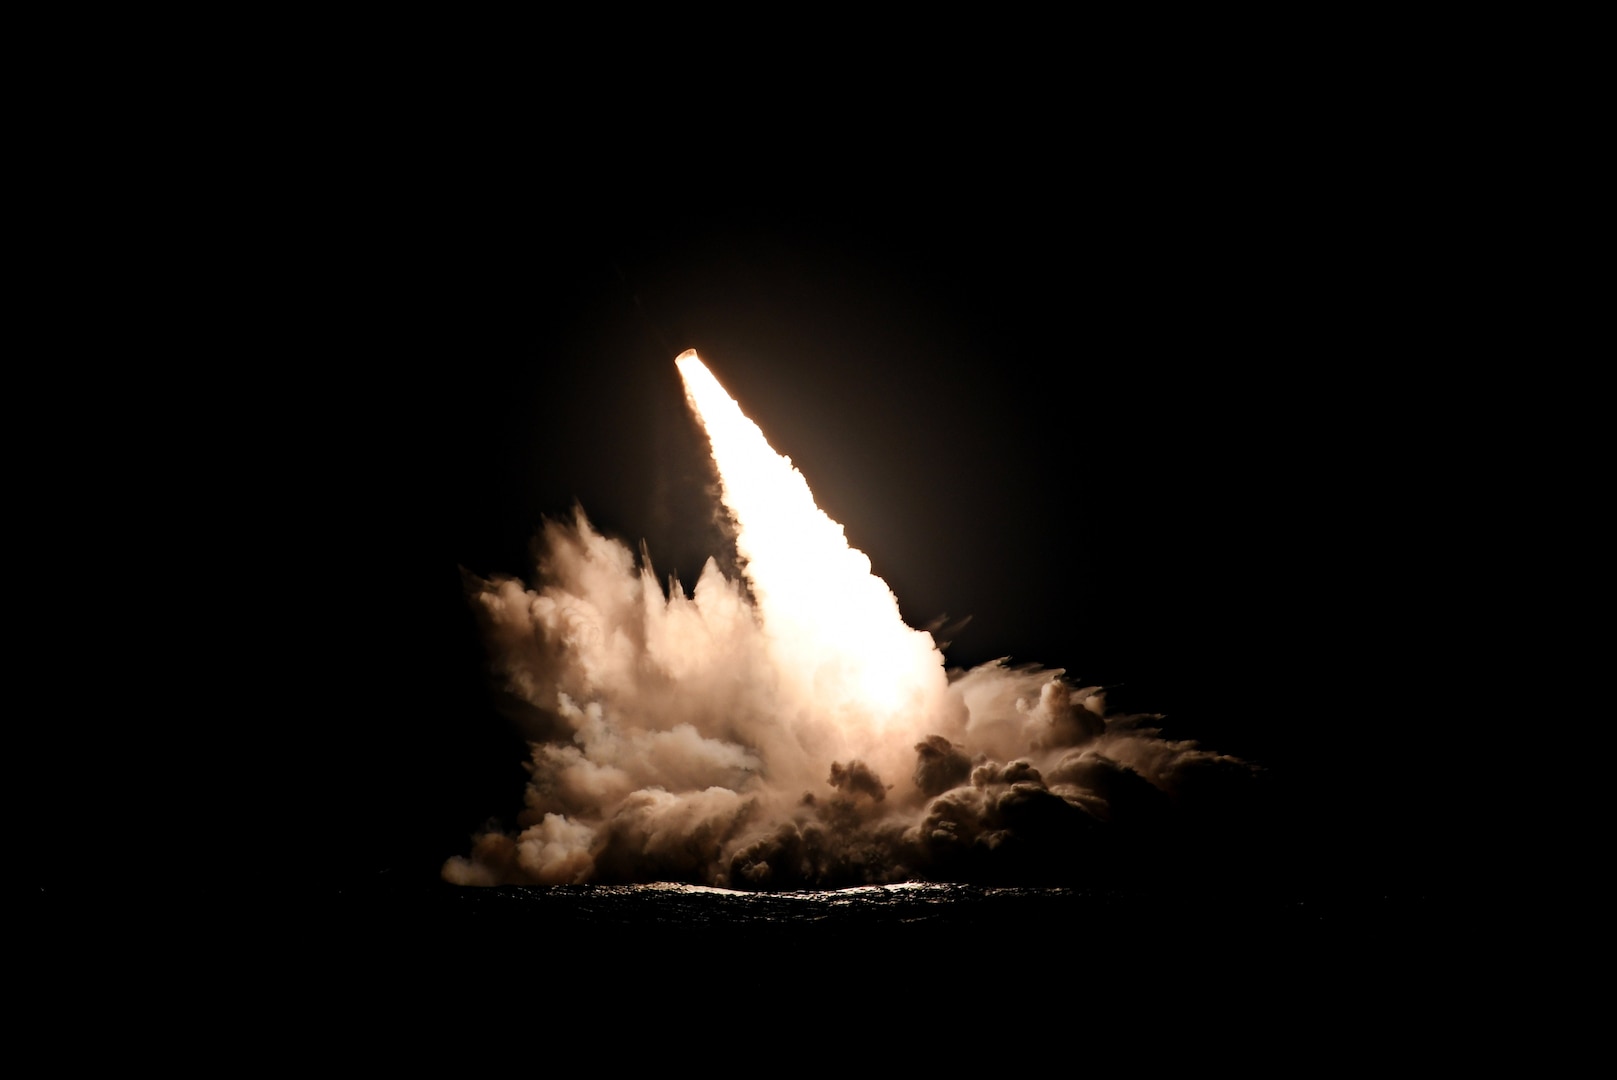 An unarmed Trident II D5 missile launches from the Ohio-class ballistic missile submarine USS Nebraska (SSBN 739) off the coast of San Diego, California, Sept. 4, 2019. The test launch was one of four conducted Sept. 4 and Sept. 6 as part of a U.S. Navy Commander Evaluation Test, validating performance expectations of the life-extended Trident II D5 strategic weapon system. These four launches mark 176 successful missile launches of the Trident II D5 strategic weapon system.